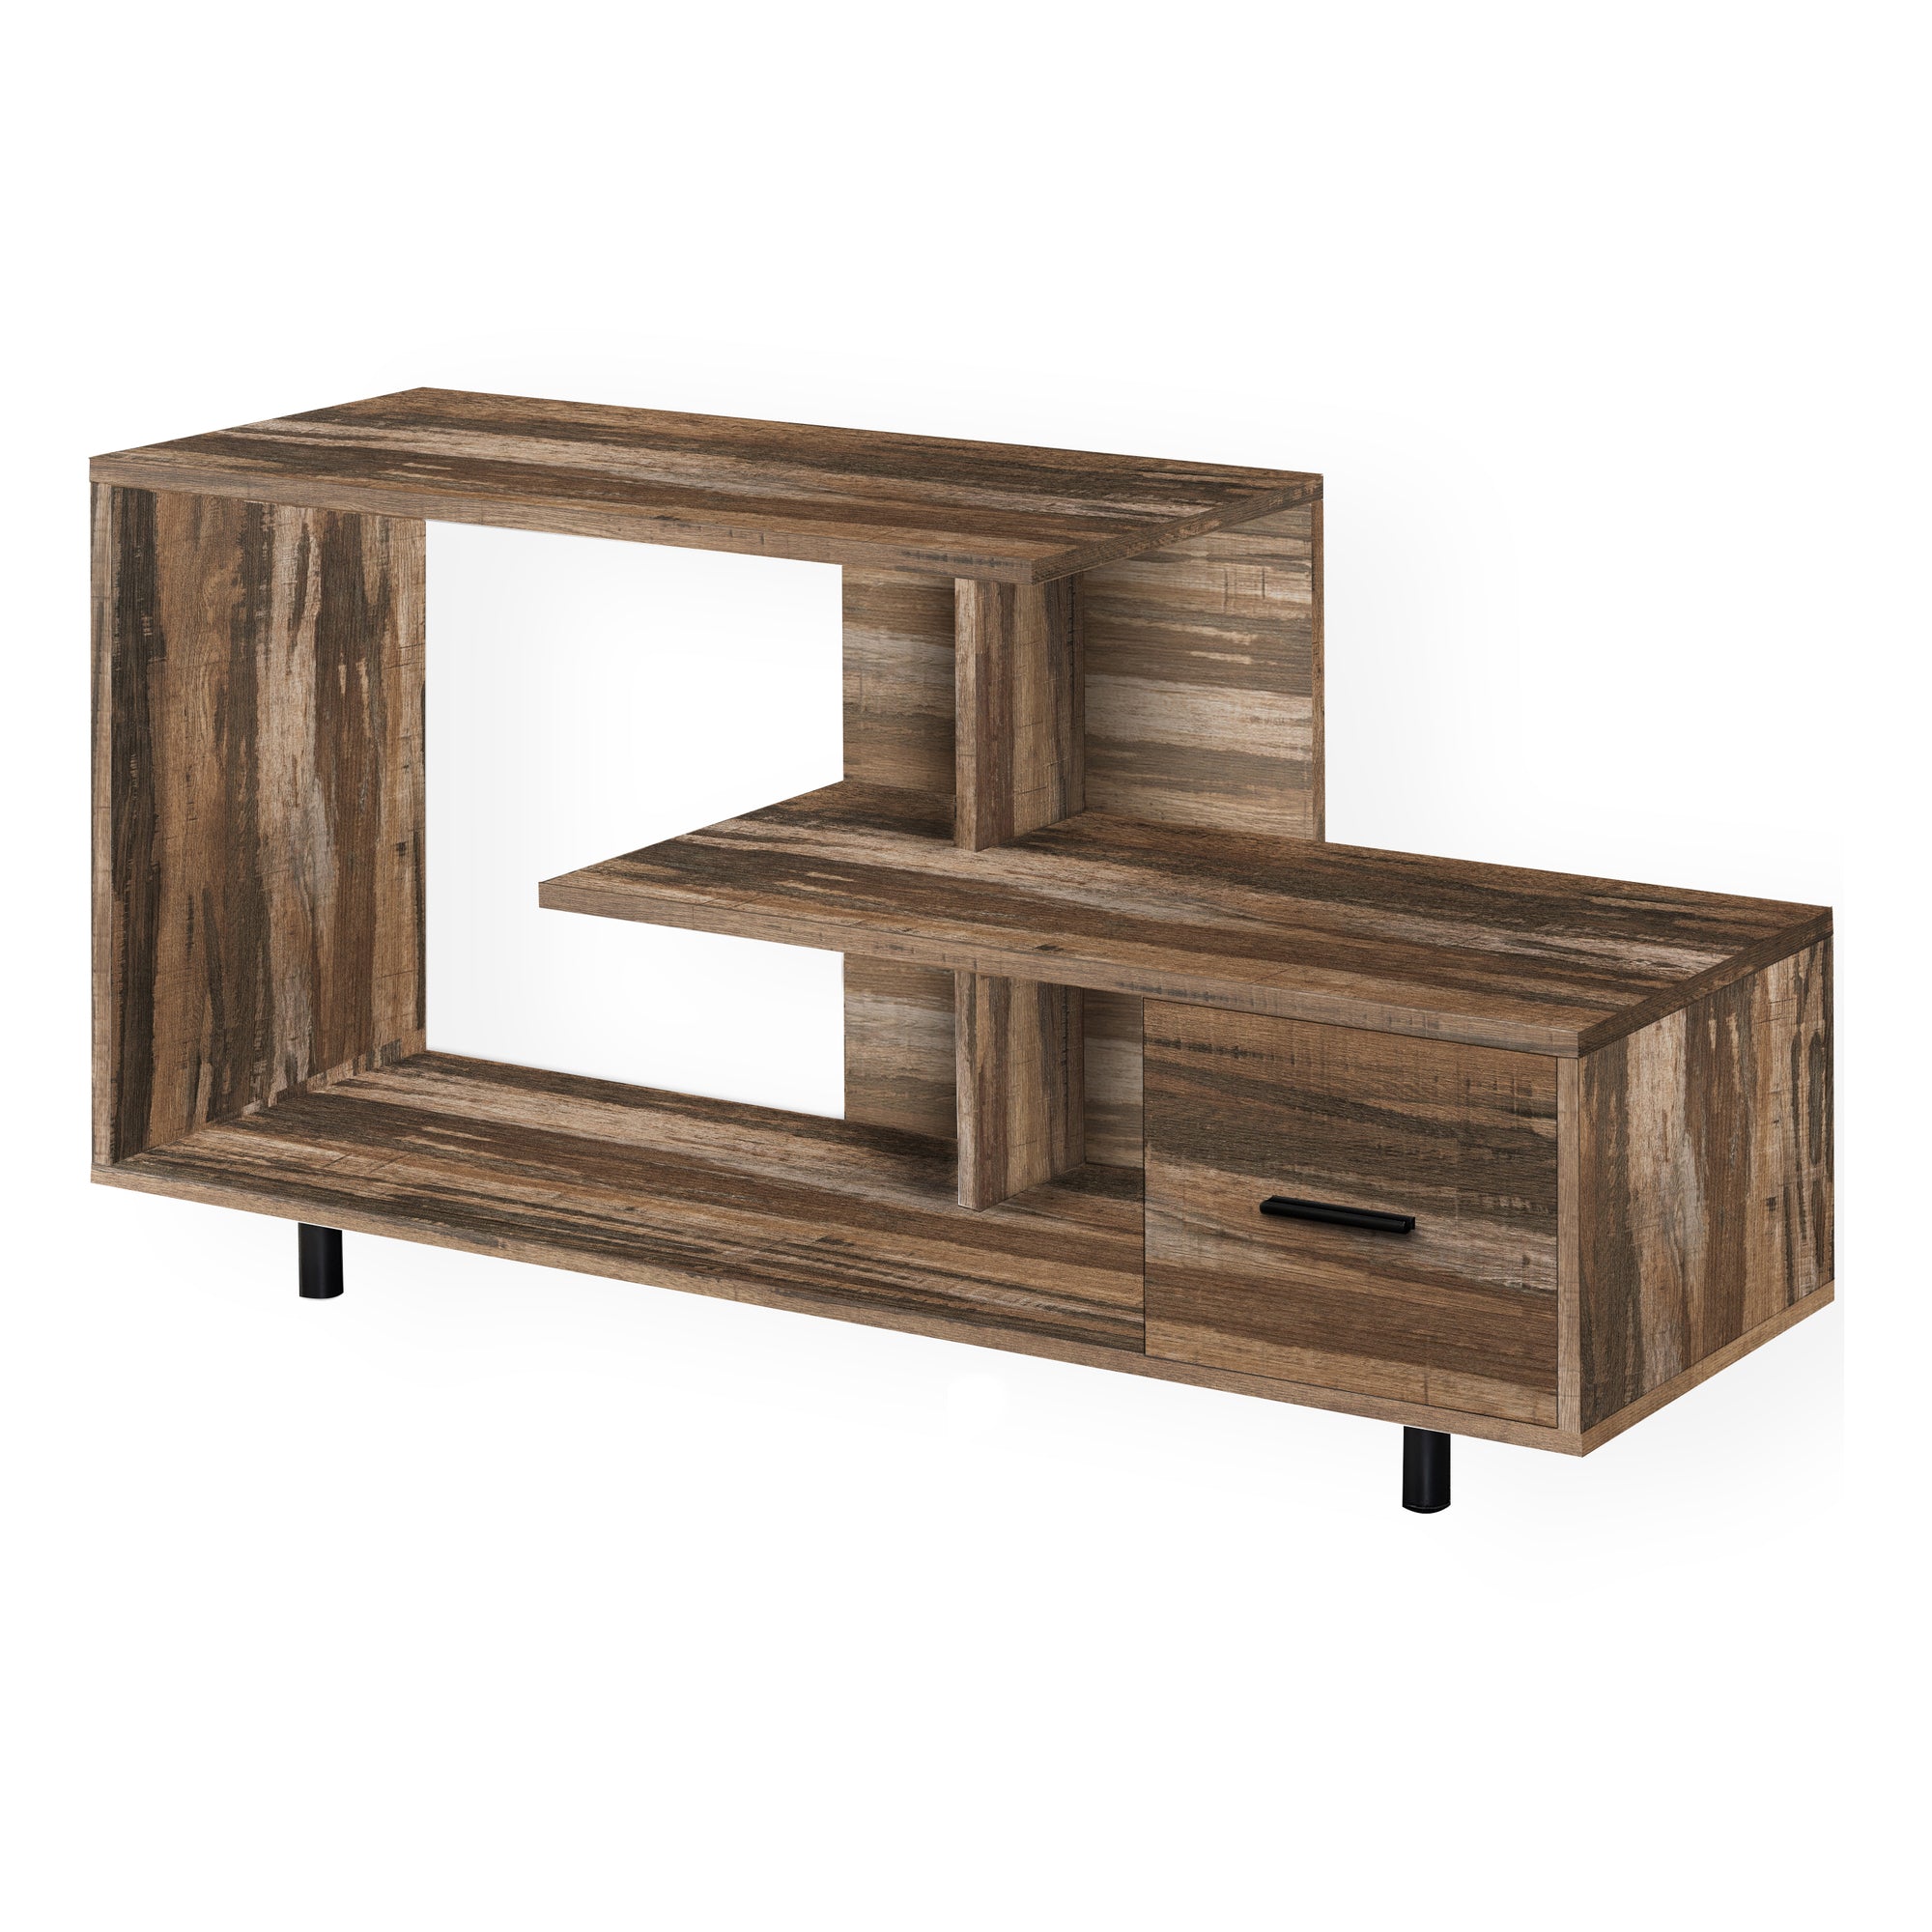 TV STAND - 48"L / BROWN RECLAIMED / 1 DRAWER